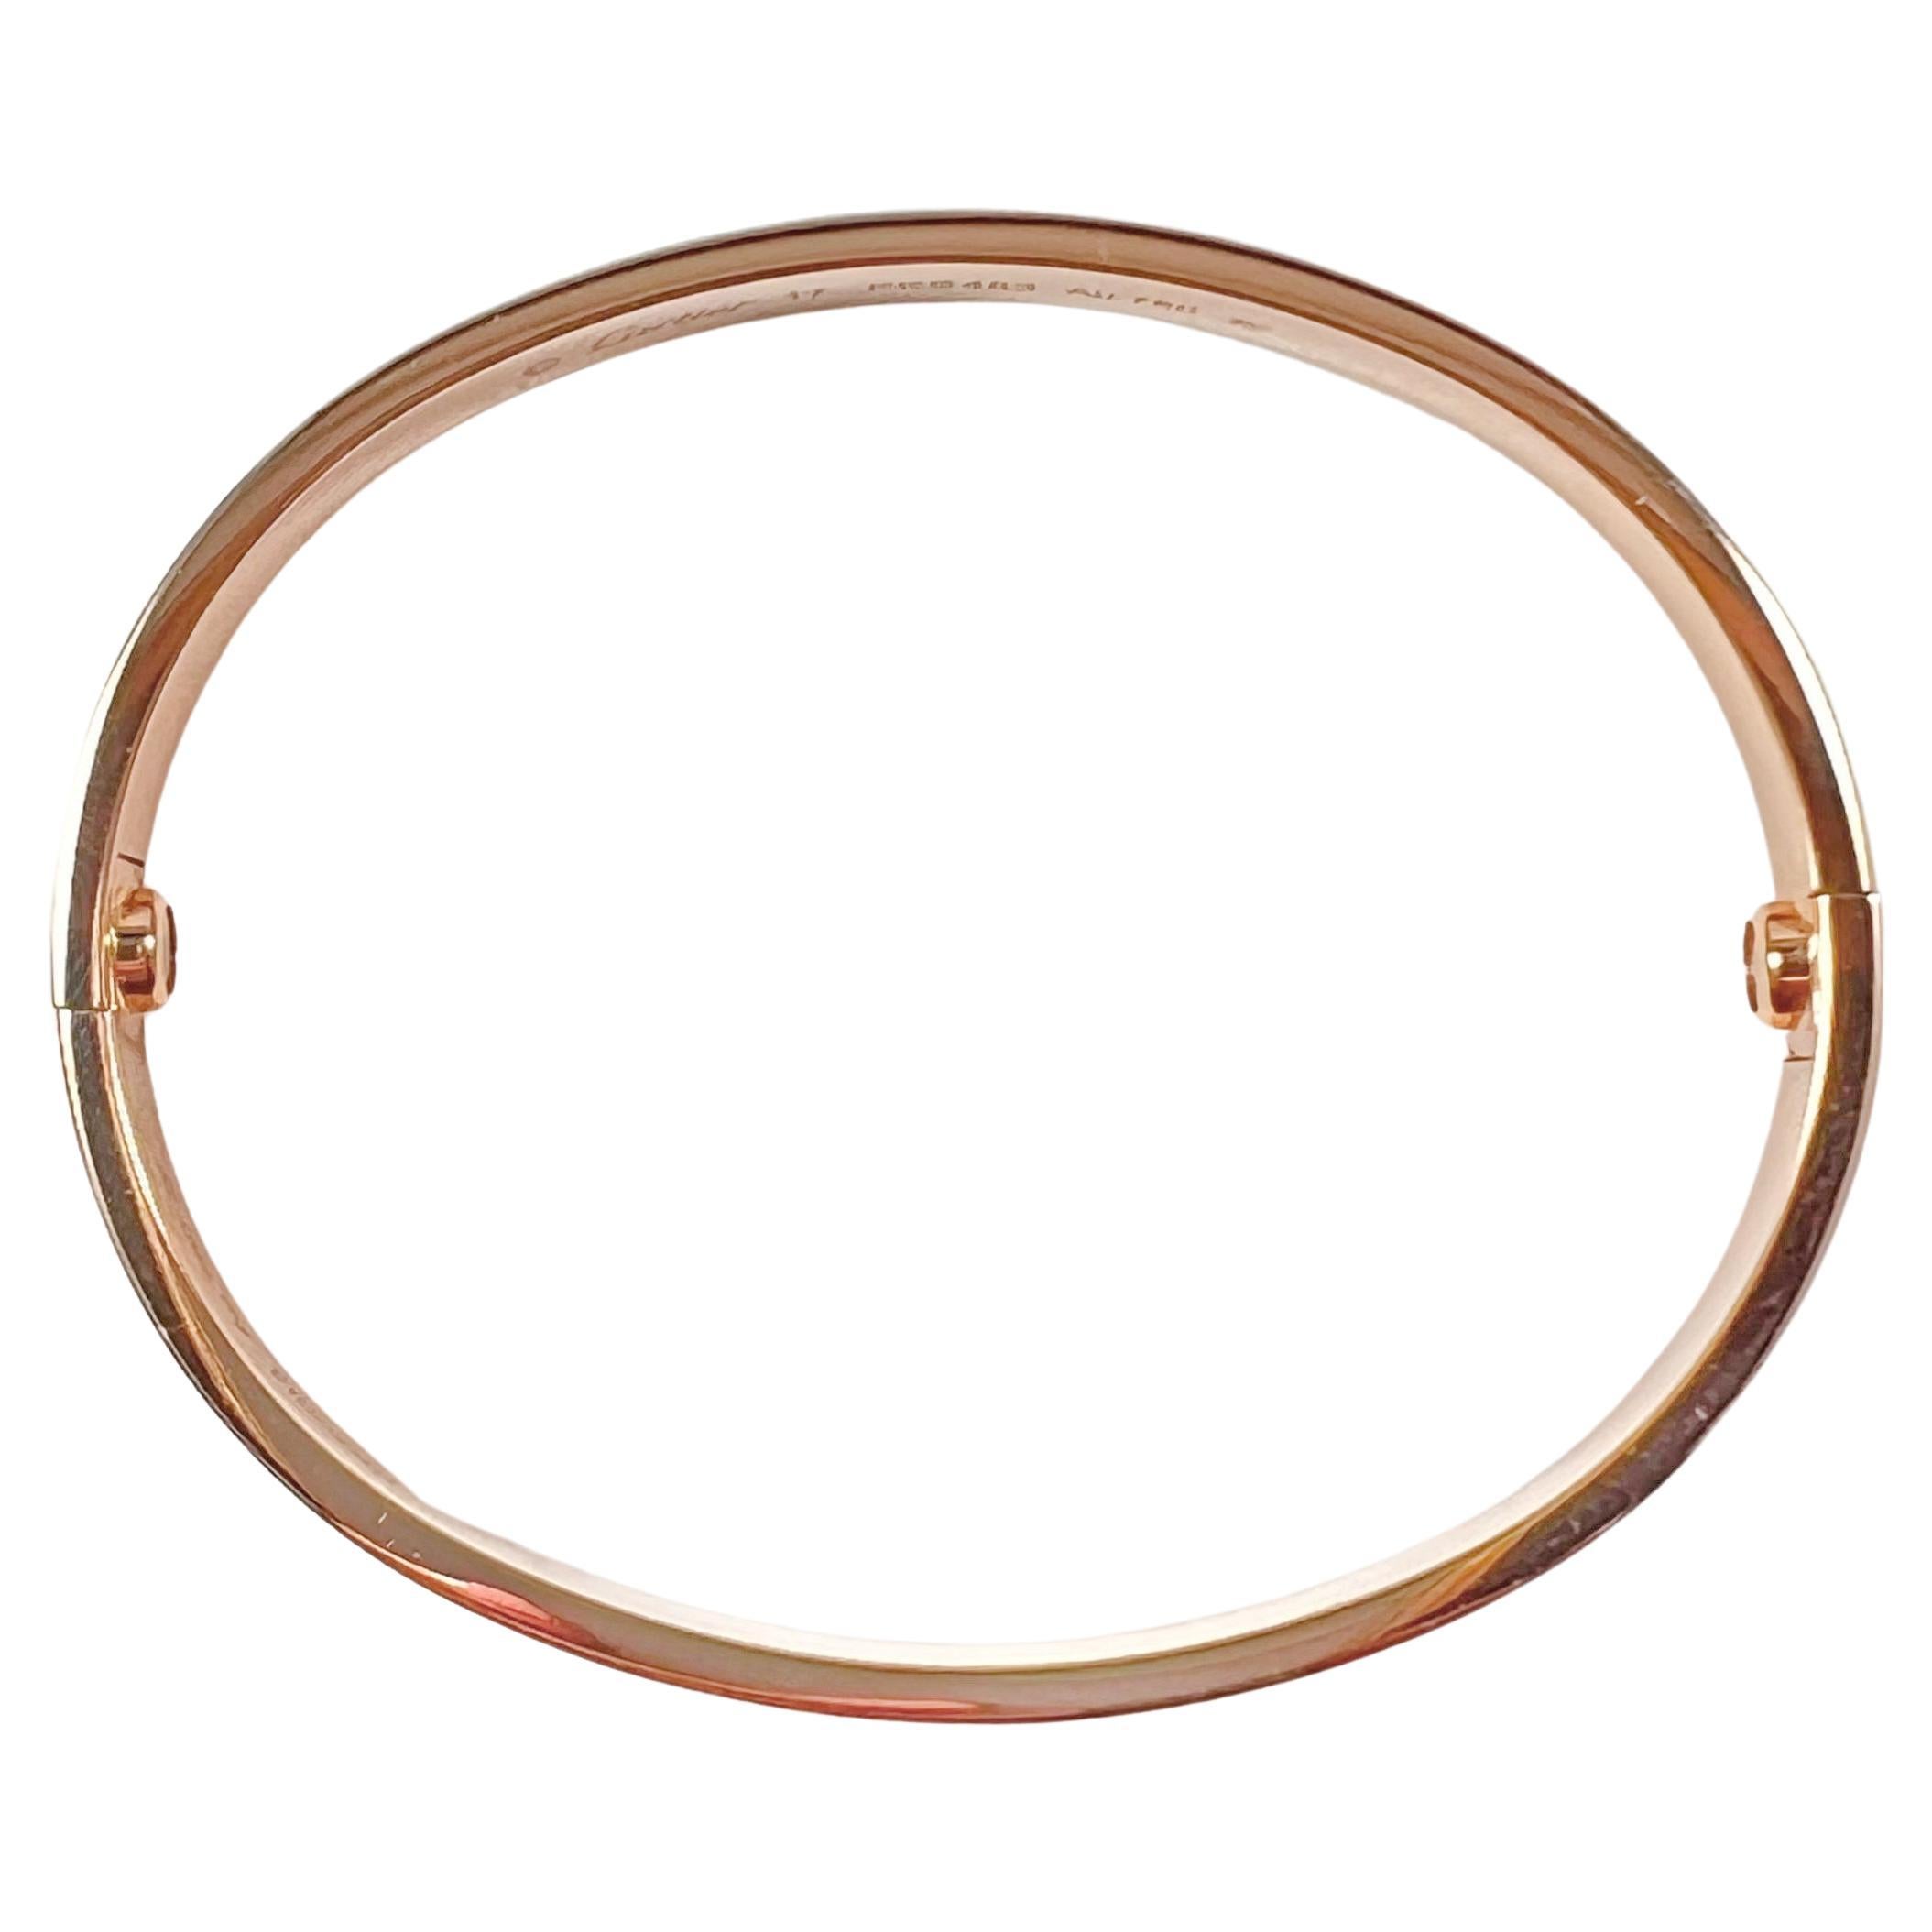 Cartier Love bangle bracelet in polished 18k rose gold, featuring the newer-style screw system.  Size 17.  Accompanied by the original signed Cartier screwdriver, as well as inner fitted box, outer red box, as well as Cartier certificate in the